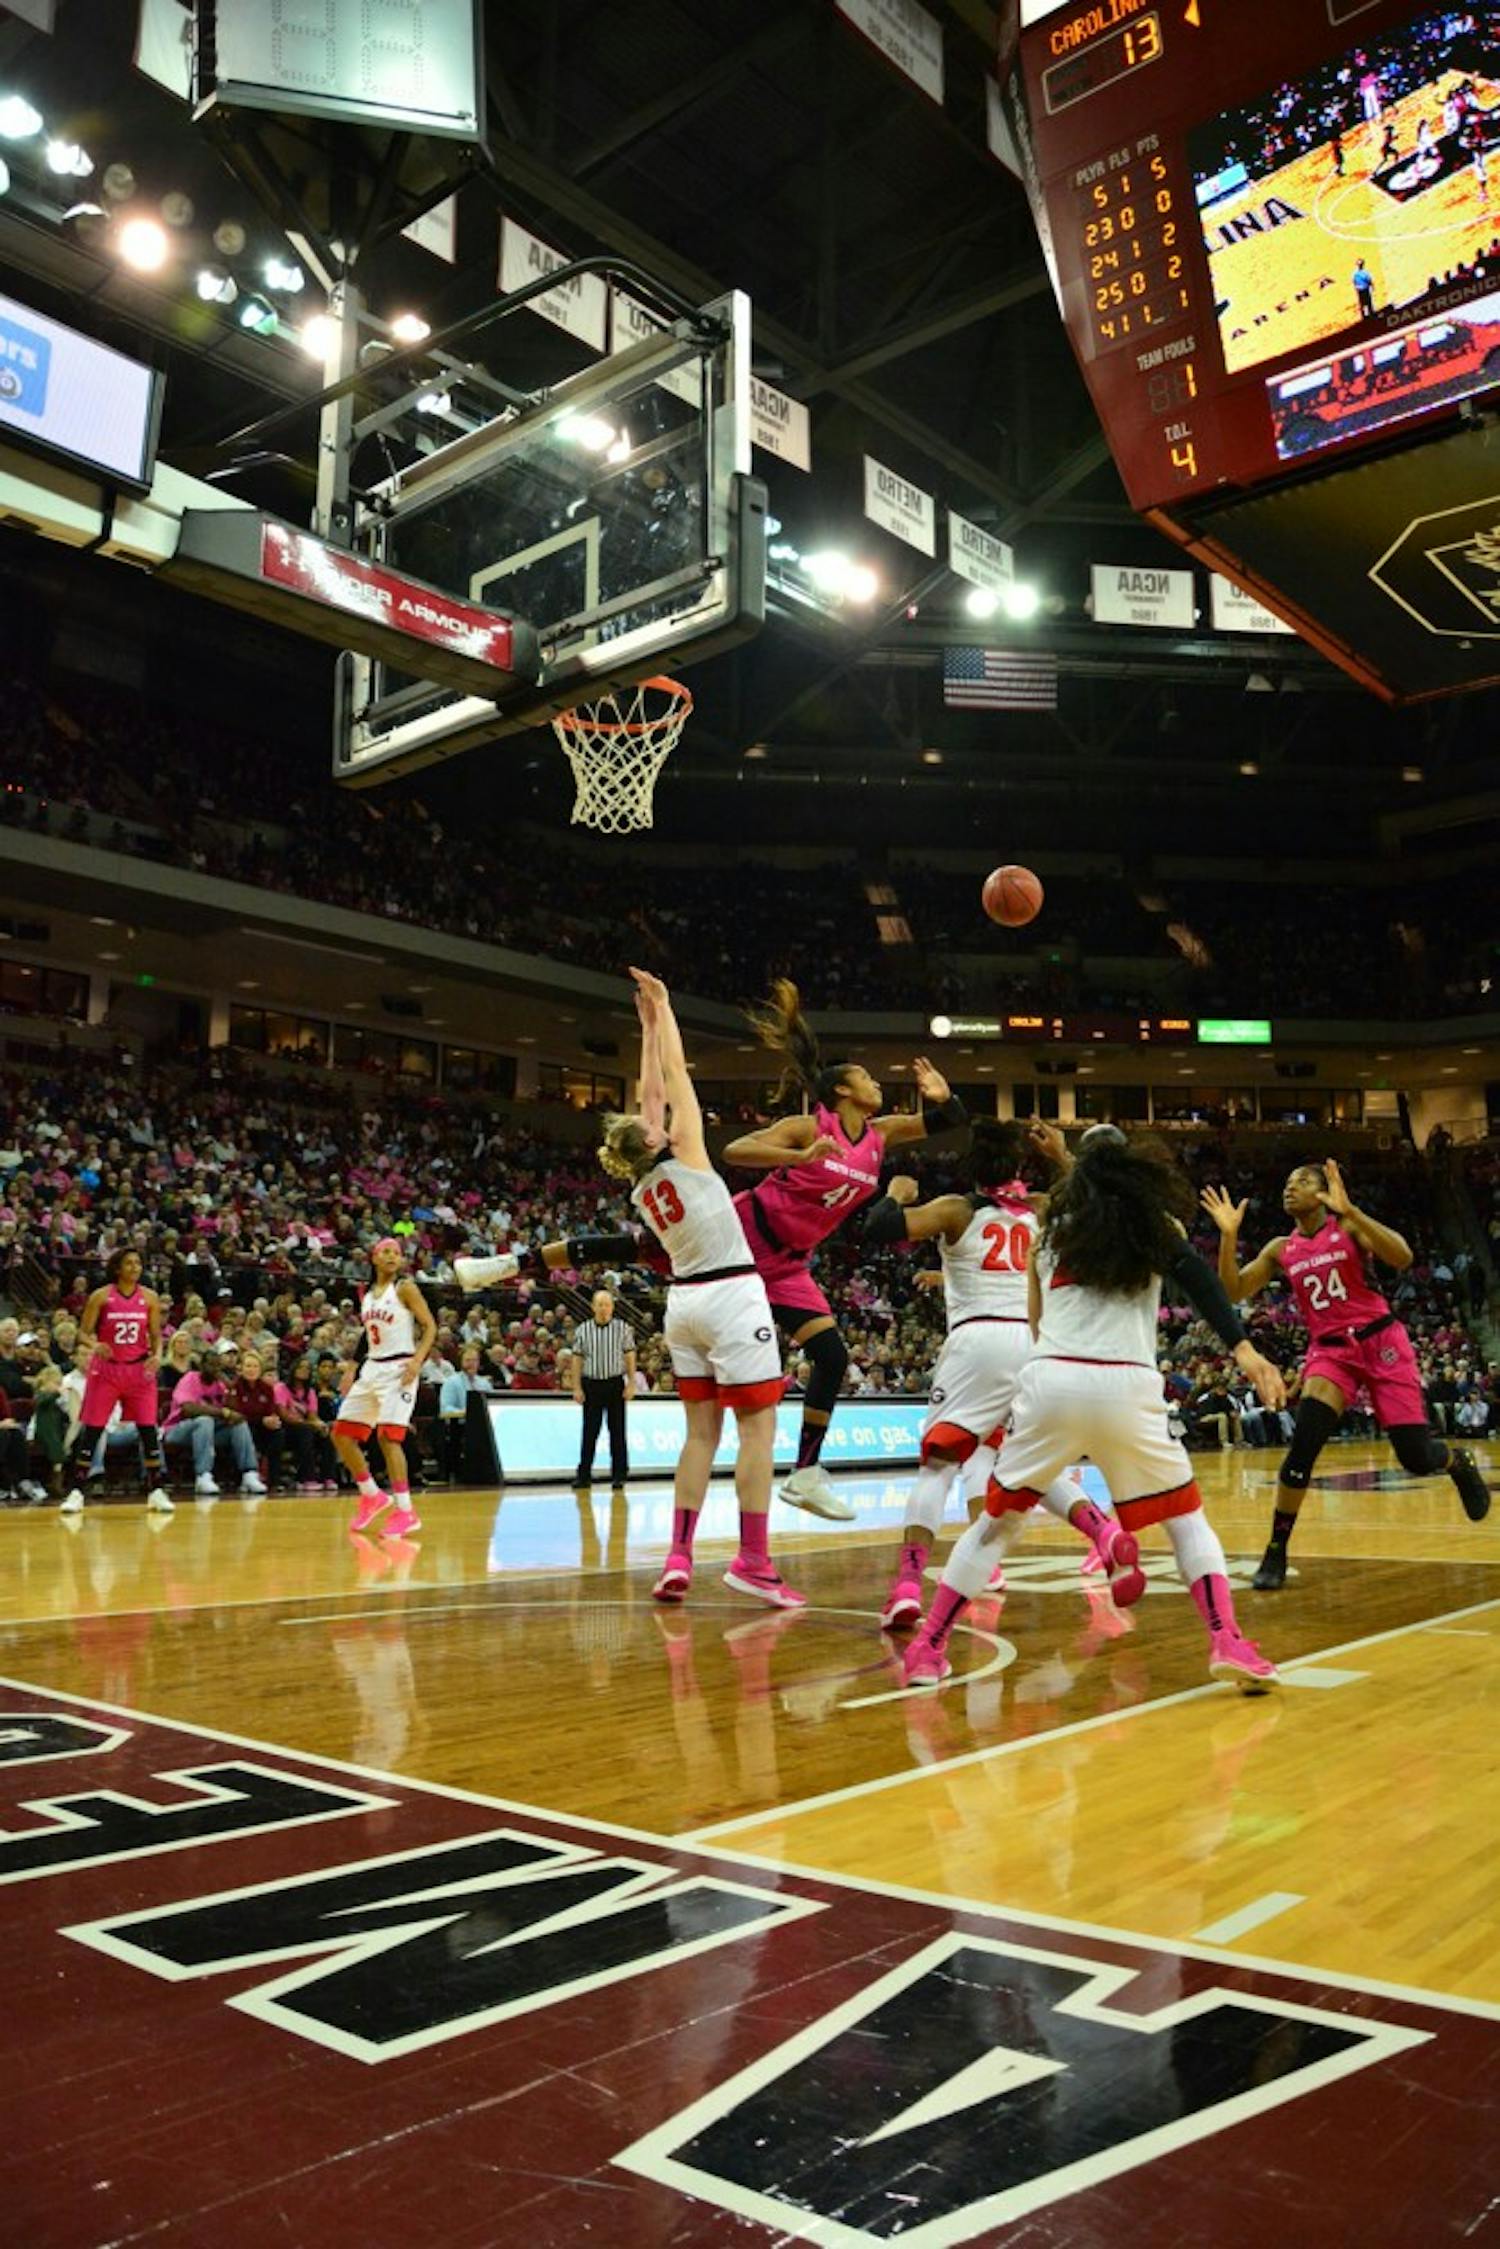 Sarah Imovbioh's (24) poor pass almost gets the Georgia Bulldogs' hands on the ball, but Alaina Coates (41) is determined to keep that from happening. South Carolina Gamecocks vs Georgia Bulldogs. Colonial Life Arena, Columbia, SC. February 18, 2016